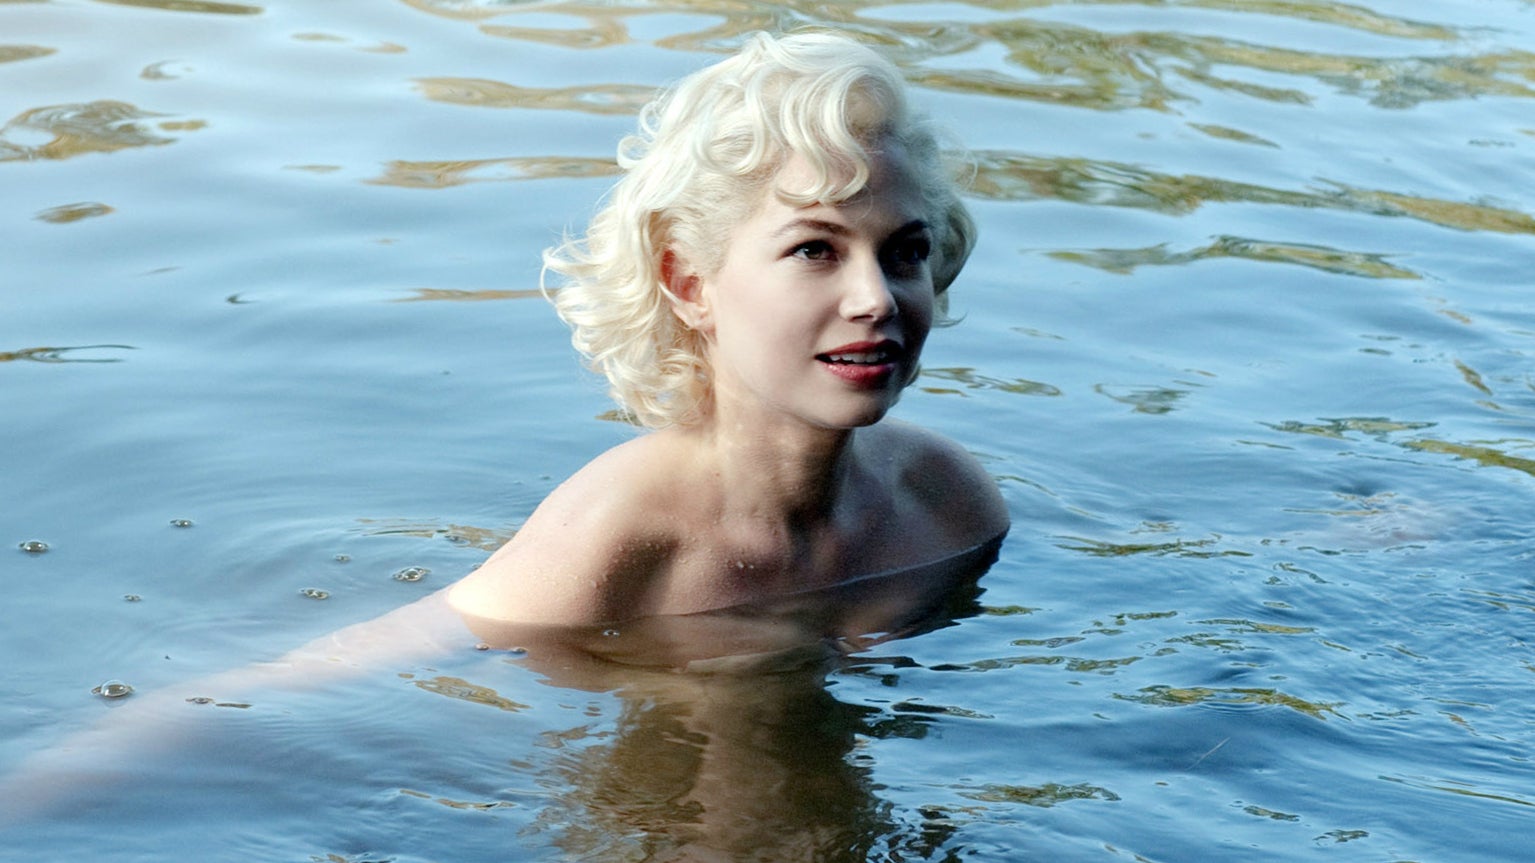 Michelle Williams played Marilyn Monroe in the 2011 biopic ‘My Week With Marilyn’